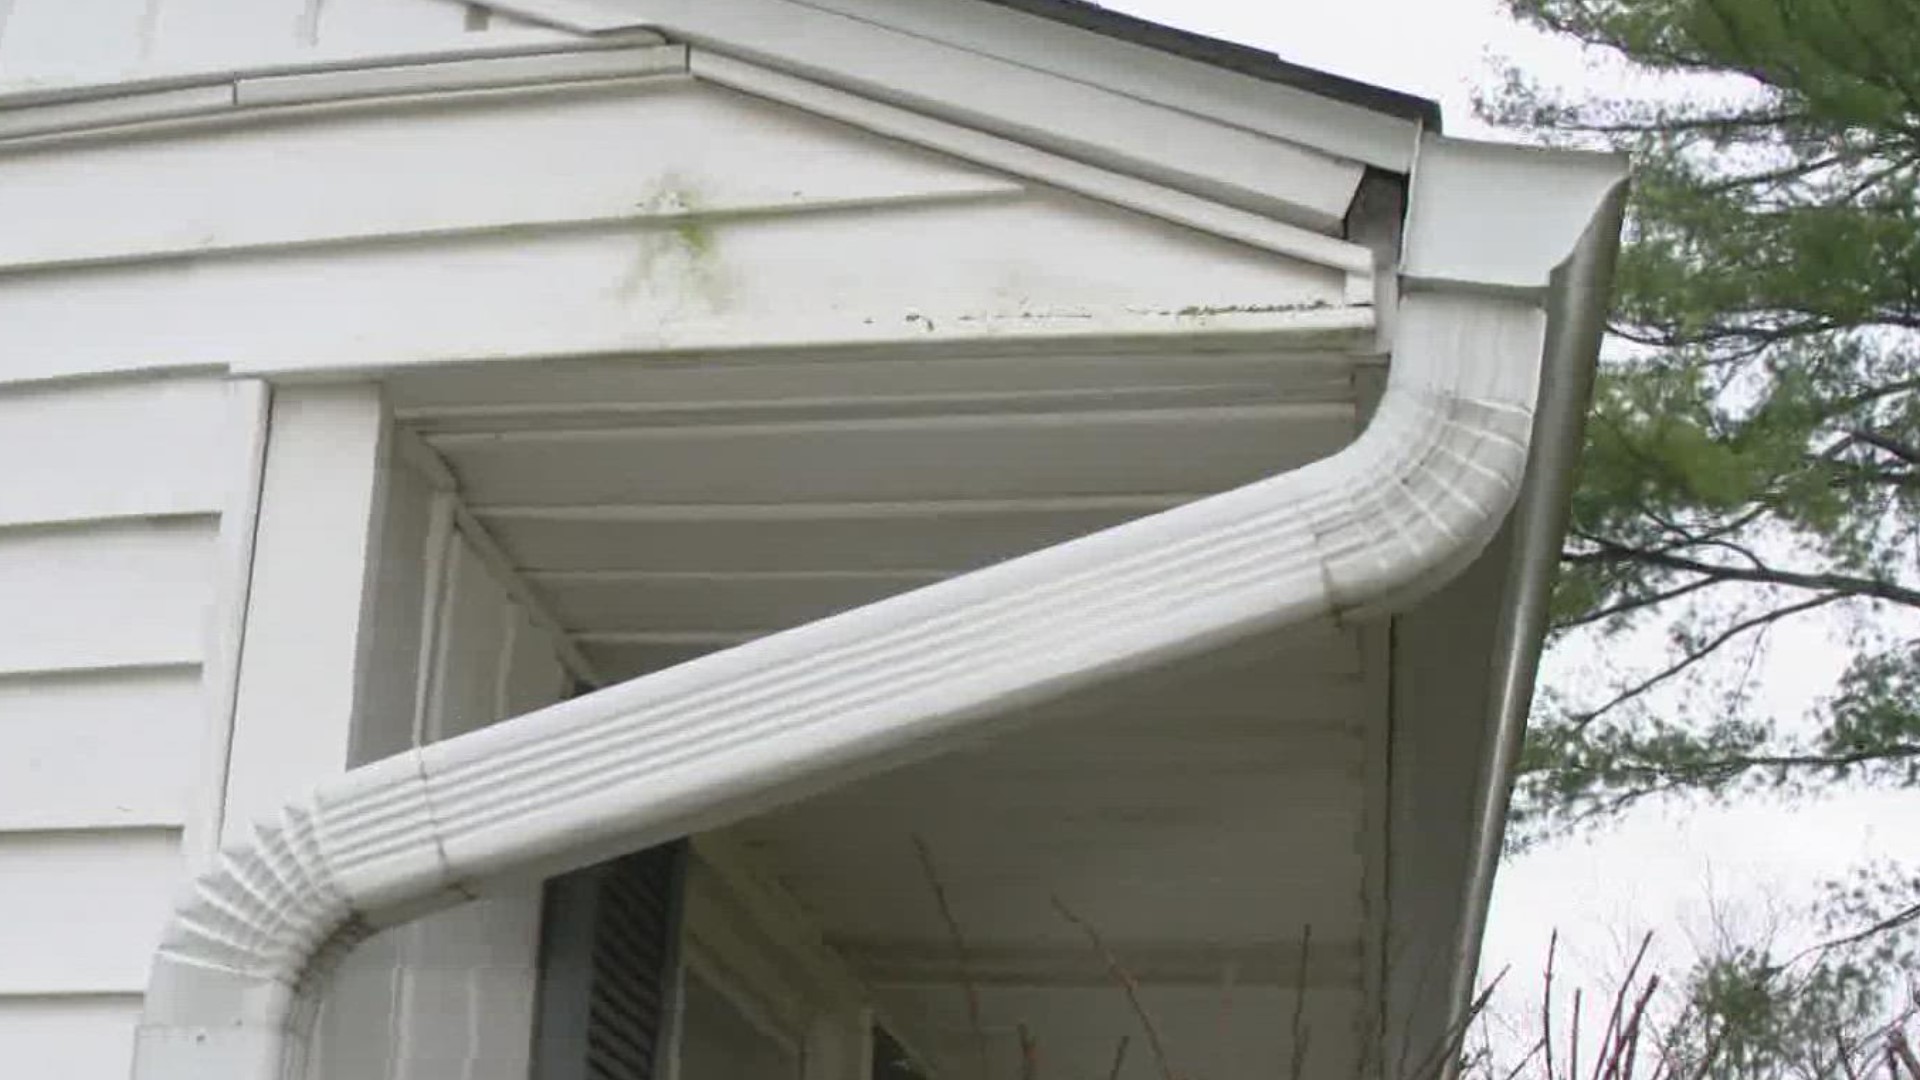 Pat Sullivan says proper gutter function and drainage is vital to a homeowner.